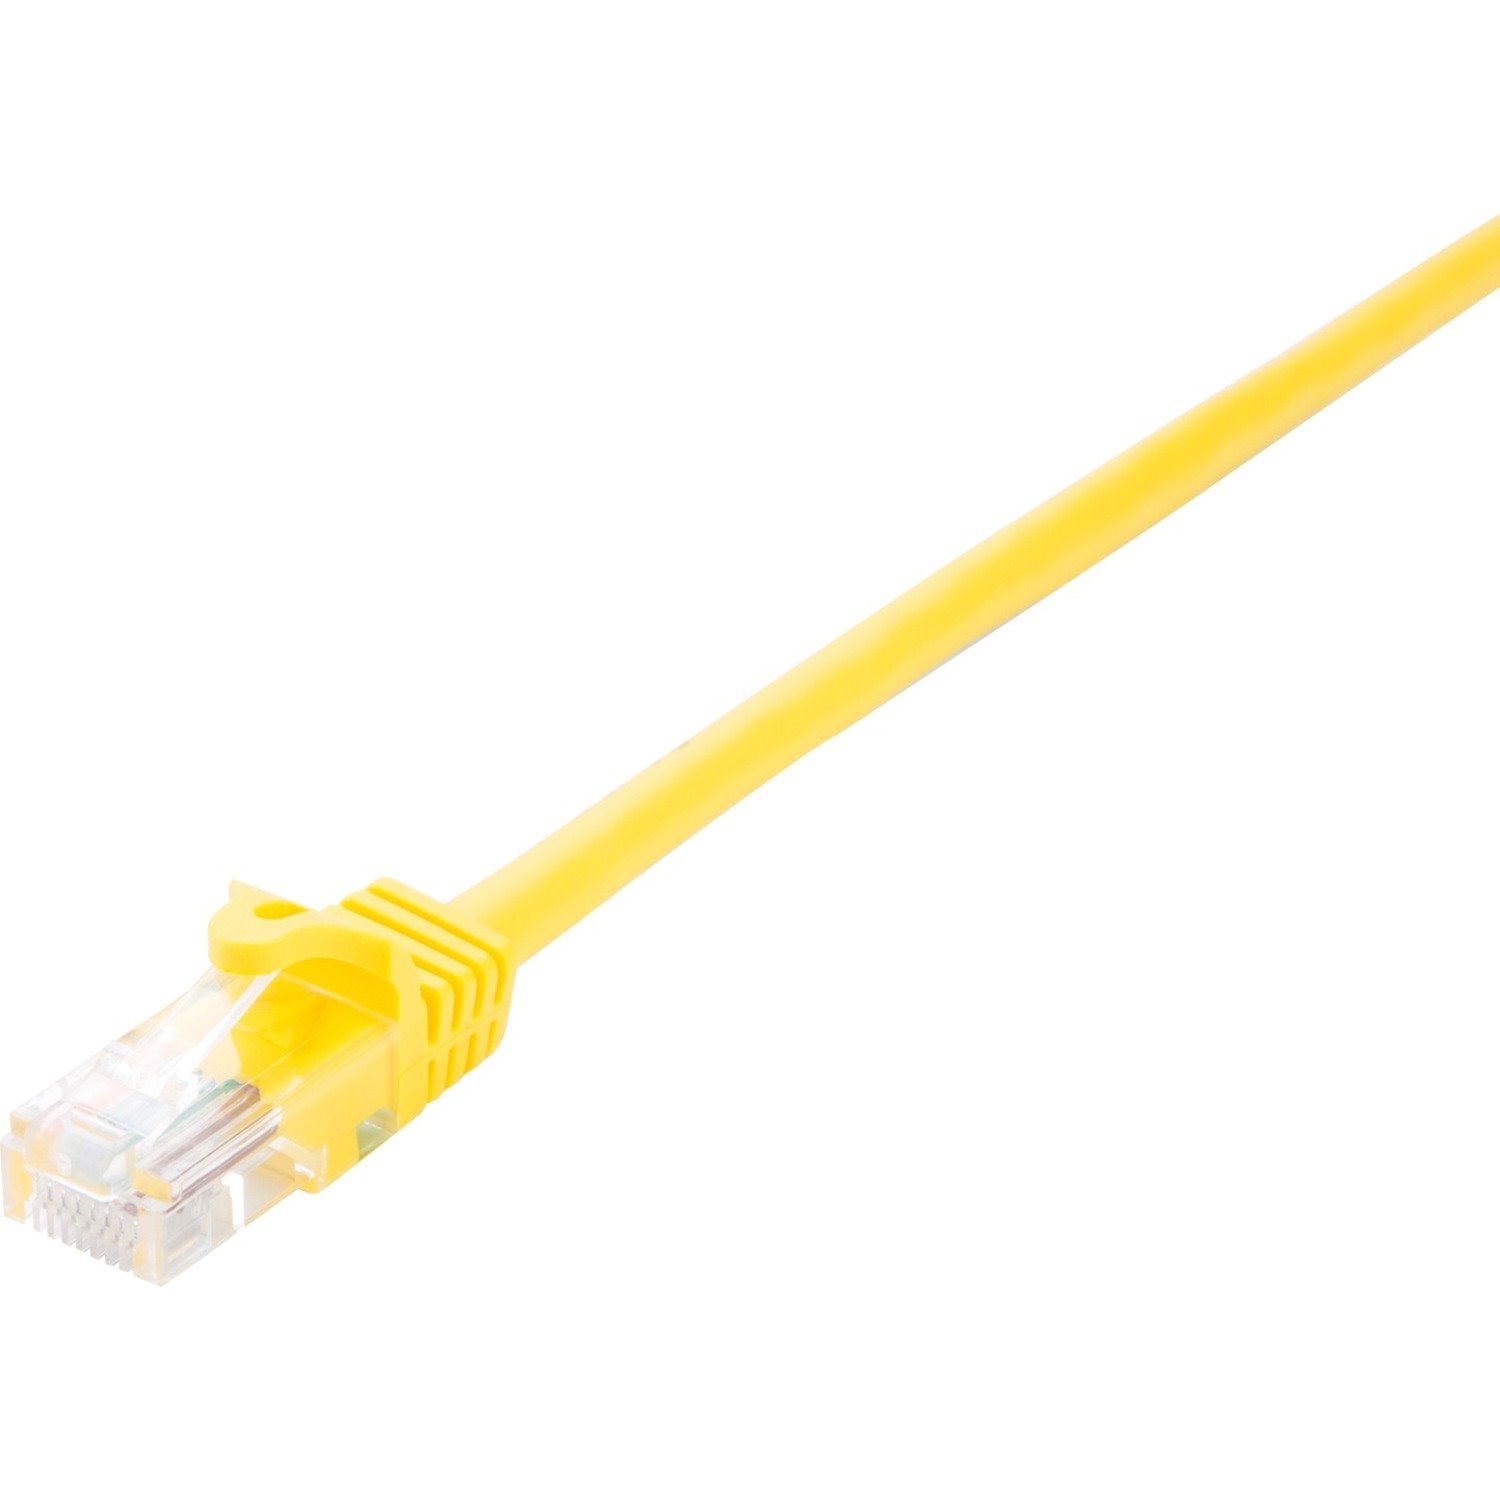 V7 Yellow Cat6 Unshielded (UTP) Cable RJ45 Male to RJ45 Male 3m 10ft